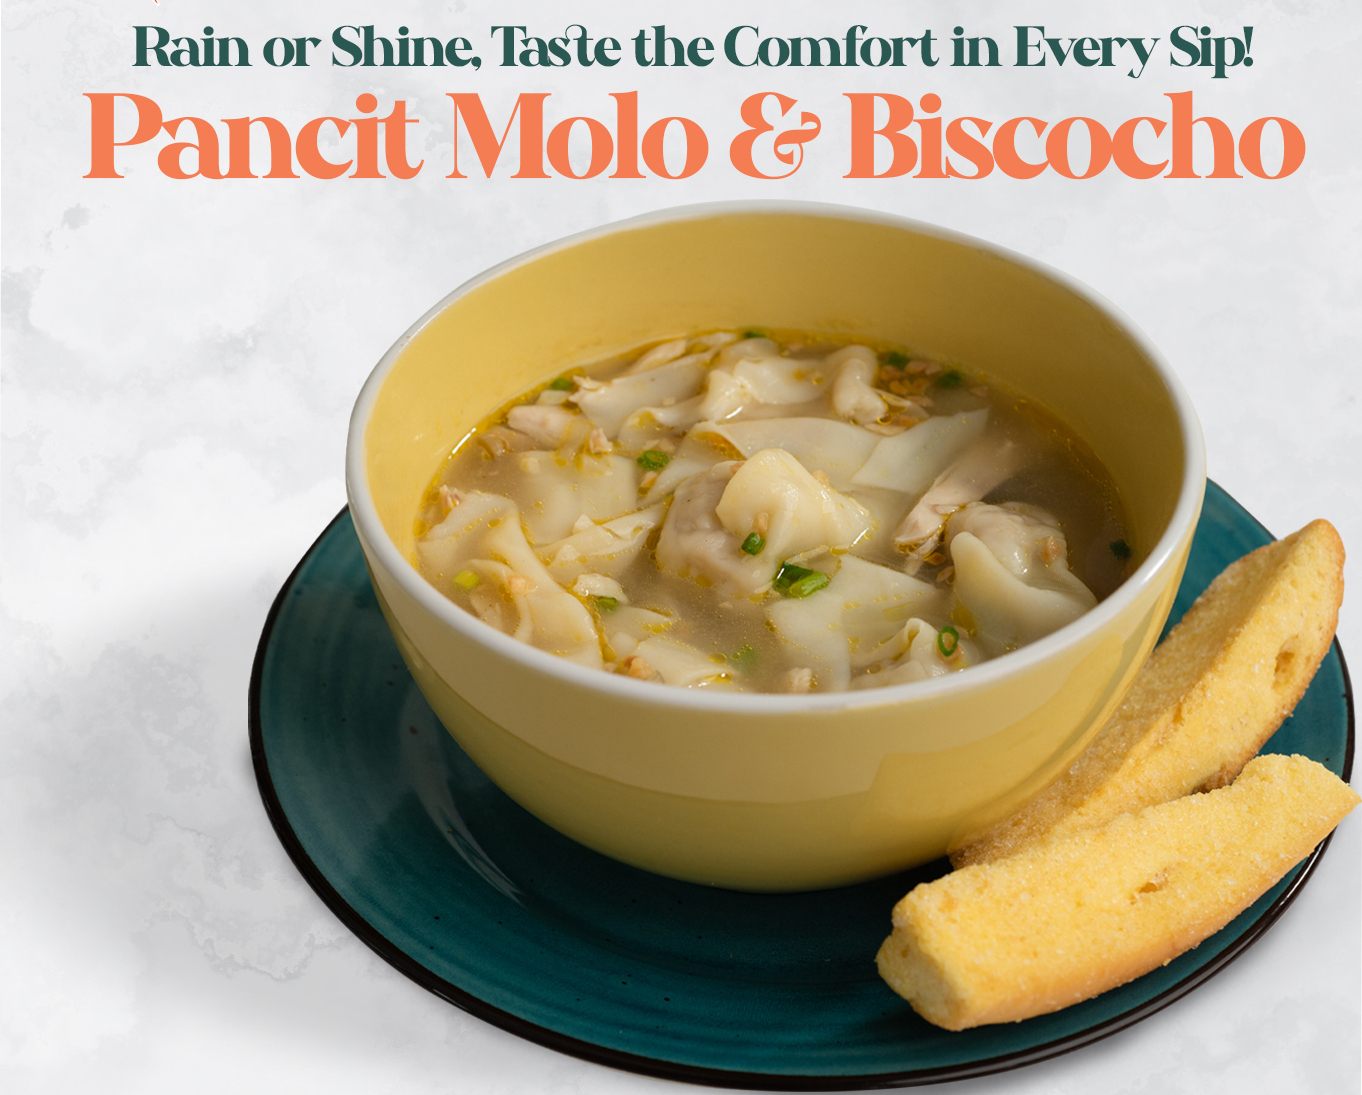 Carlo's Pancit Molo with Biscocho